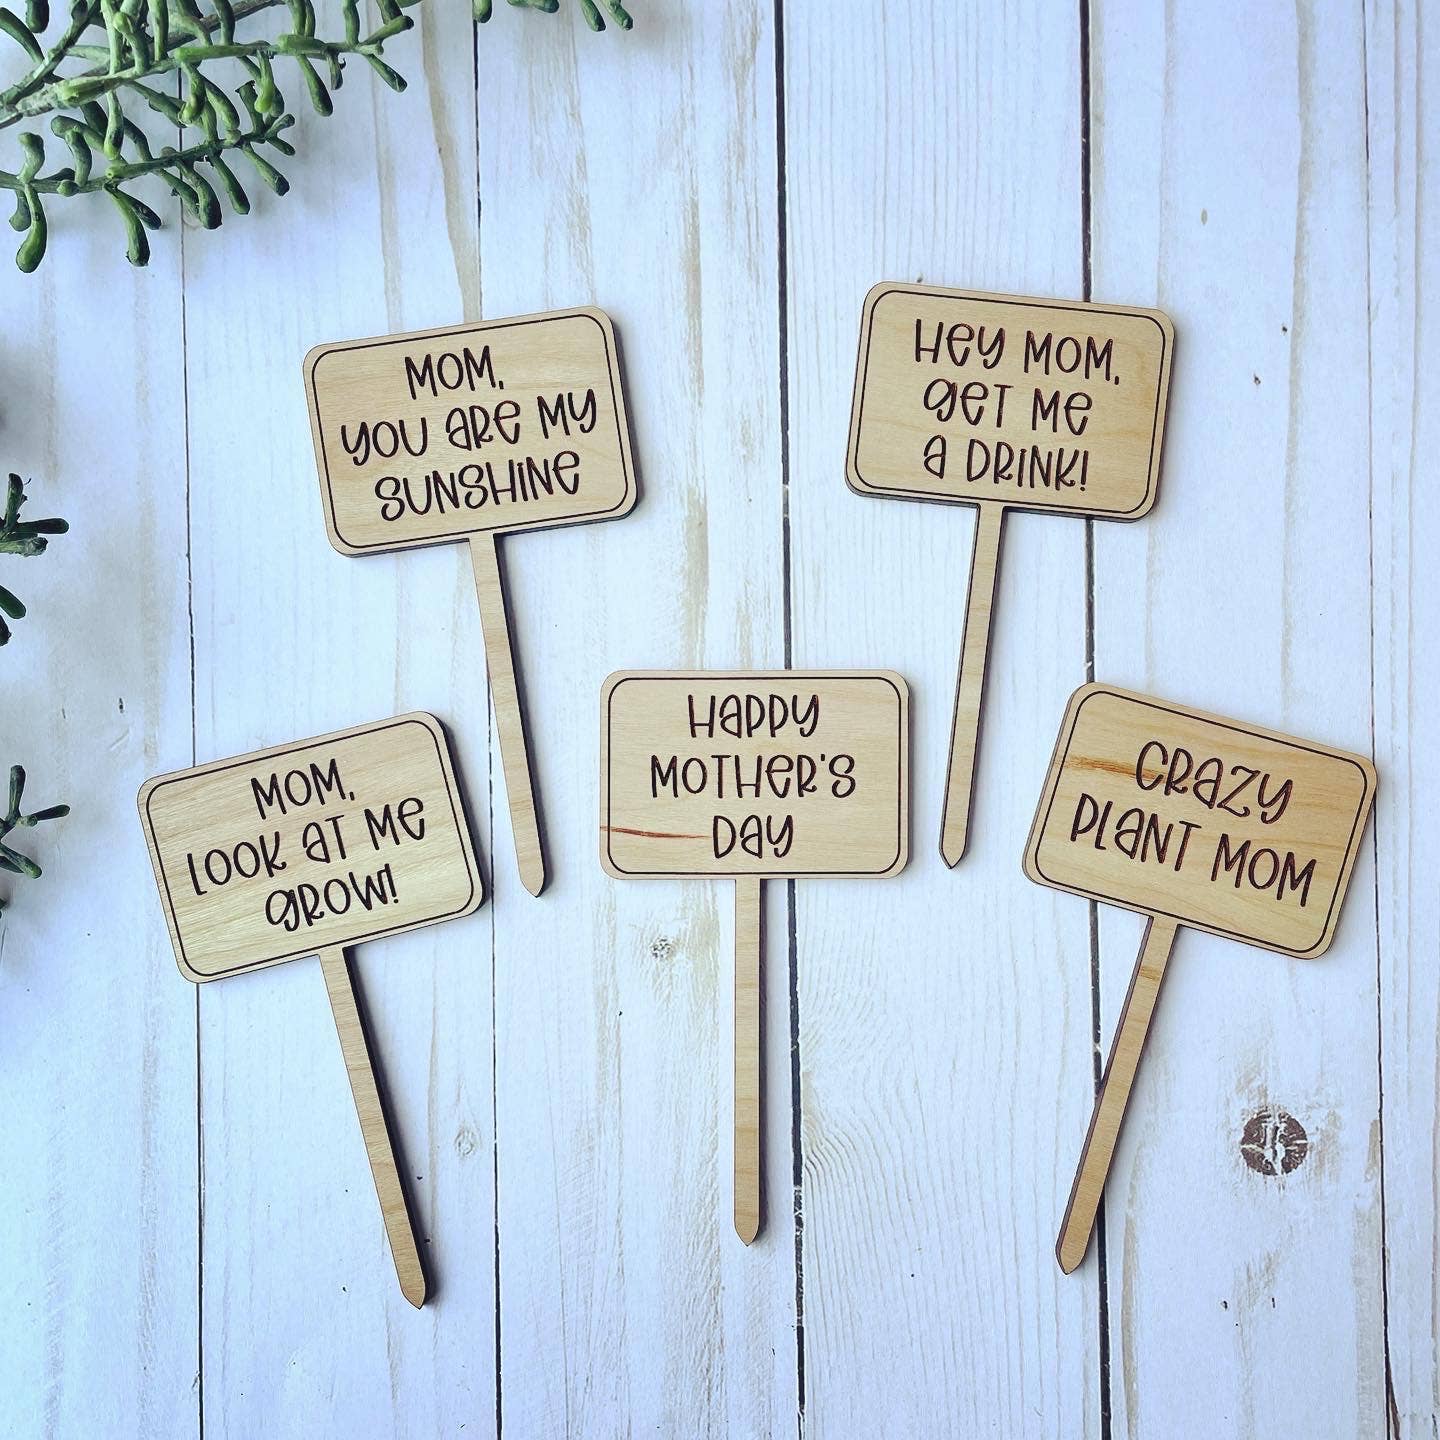 Mothers Day Funny Plant Signs: Crazy Plant Mom